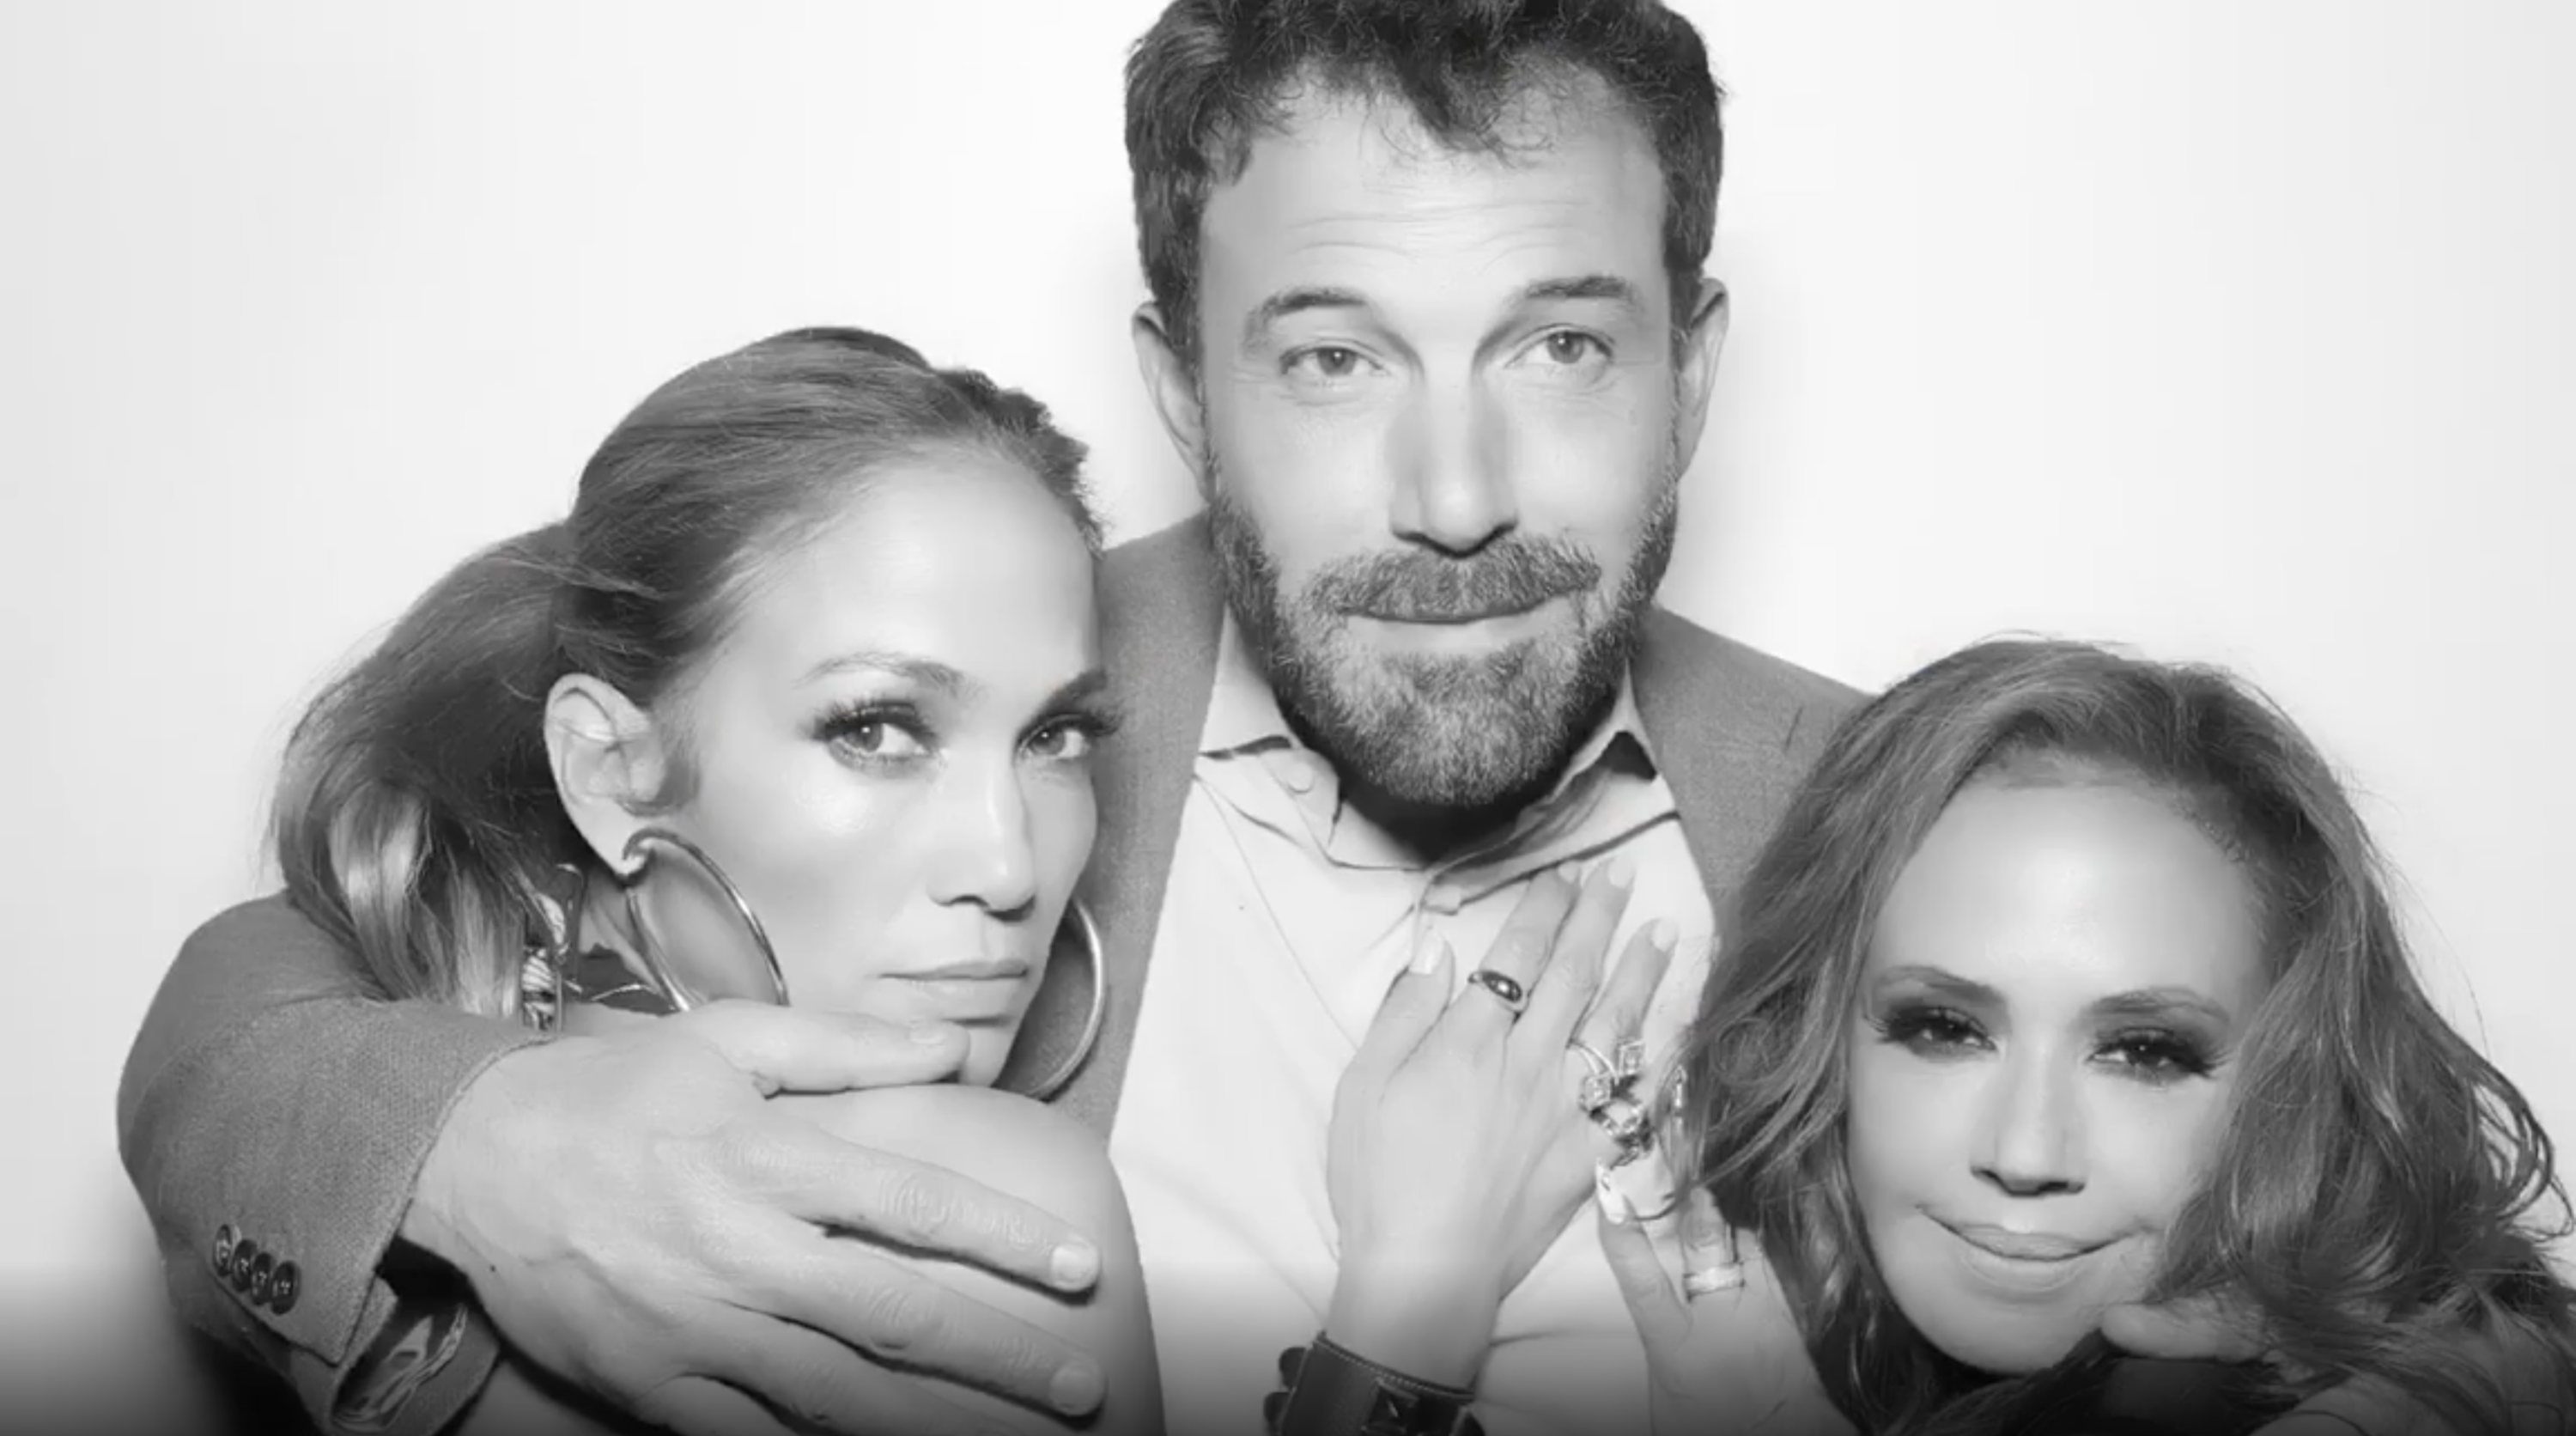 Jennifer Lopez, Ben Affleck, and Leah Remini pose together in a photo booth